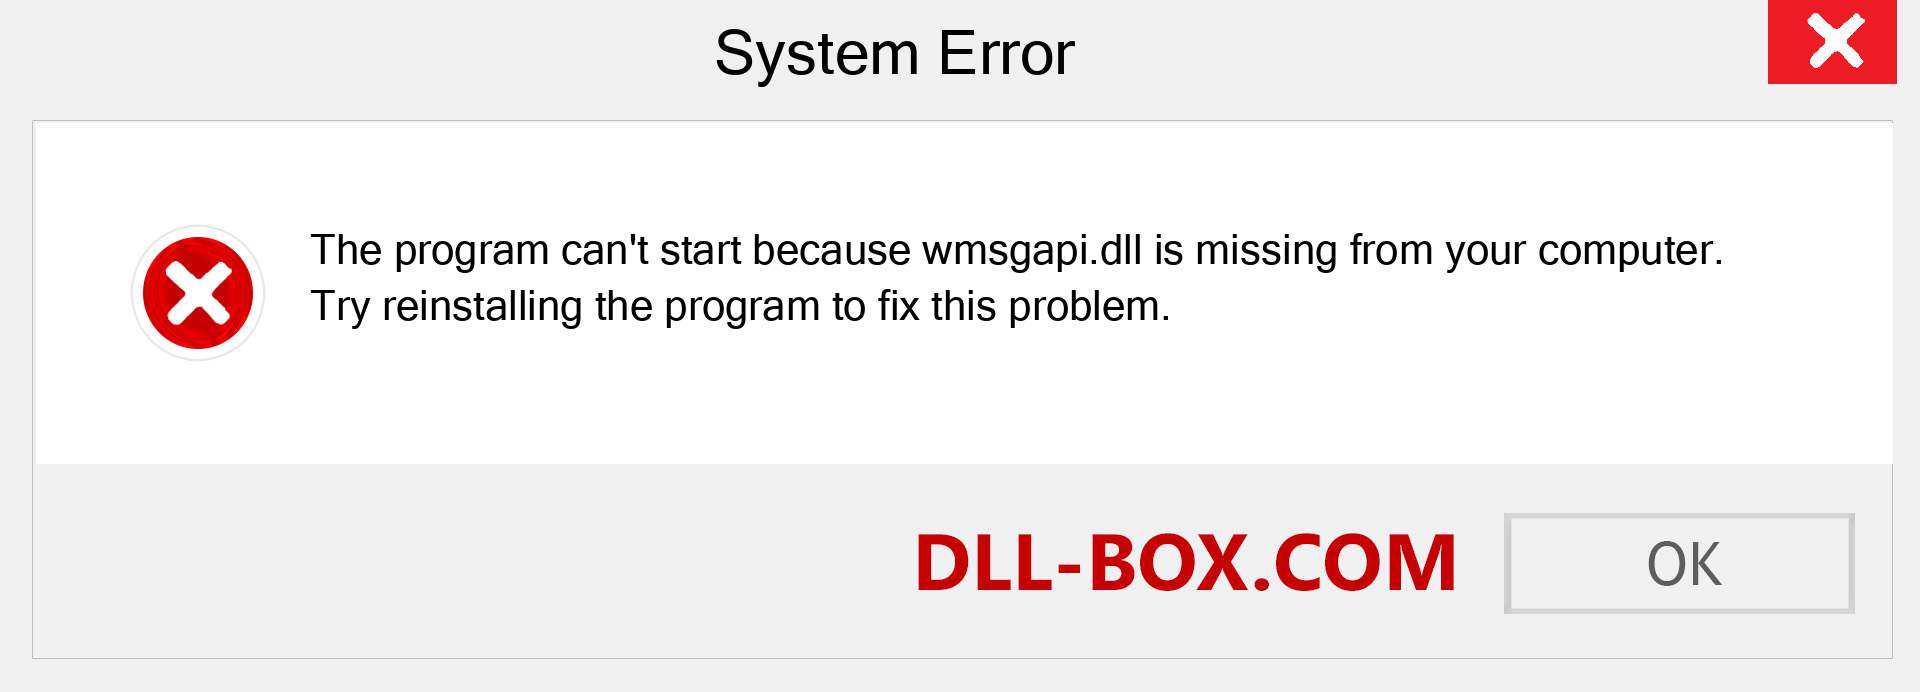  wmsgapi.dll file is missing?. Download for Windows 7, 8, 10 - Fix  wmsgapi dll Missing Error on Windows, photos, images